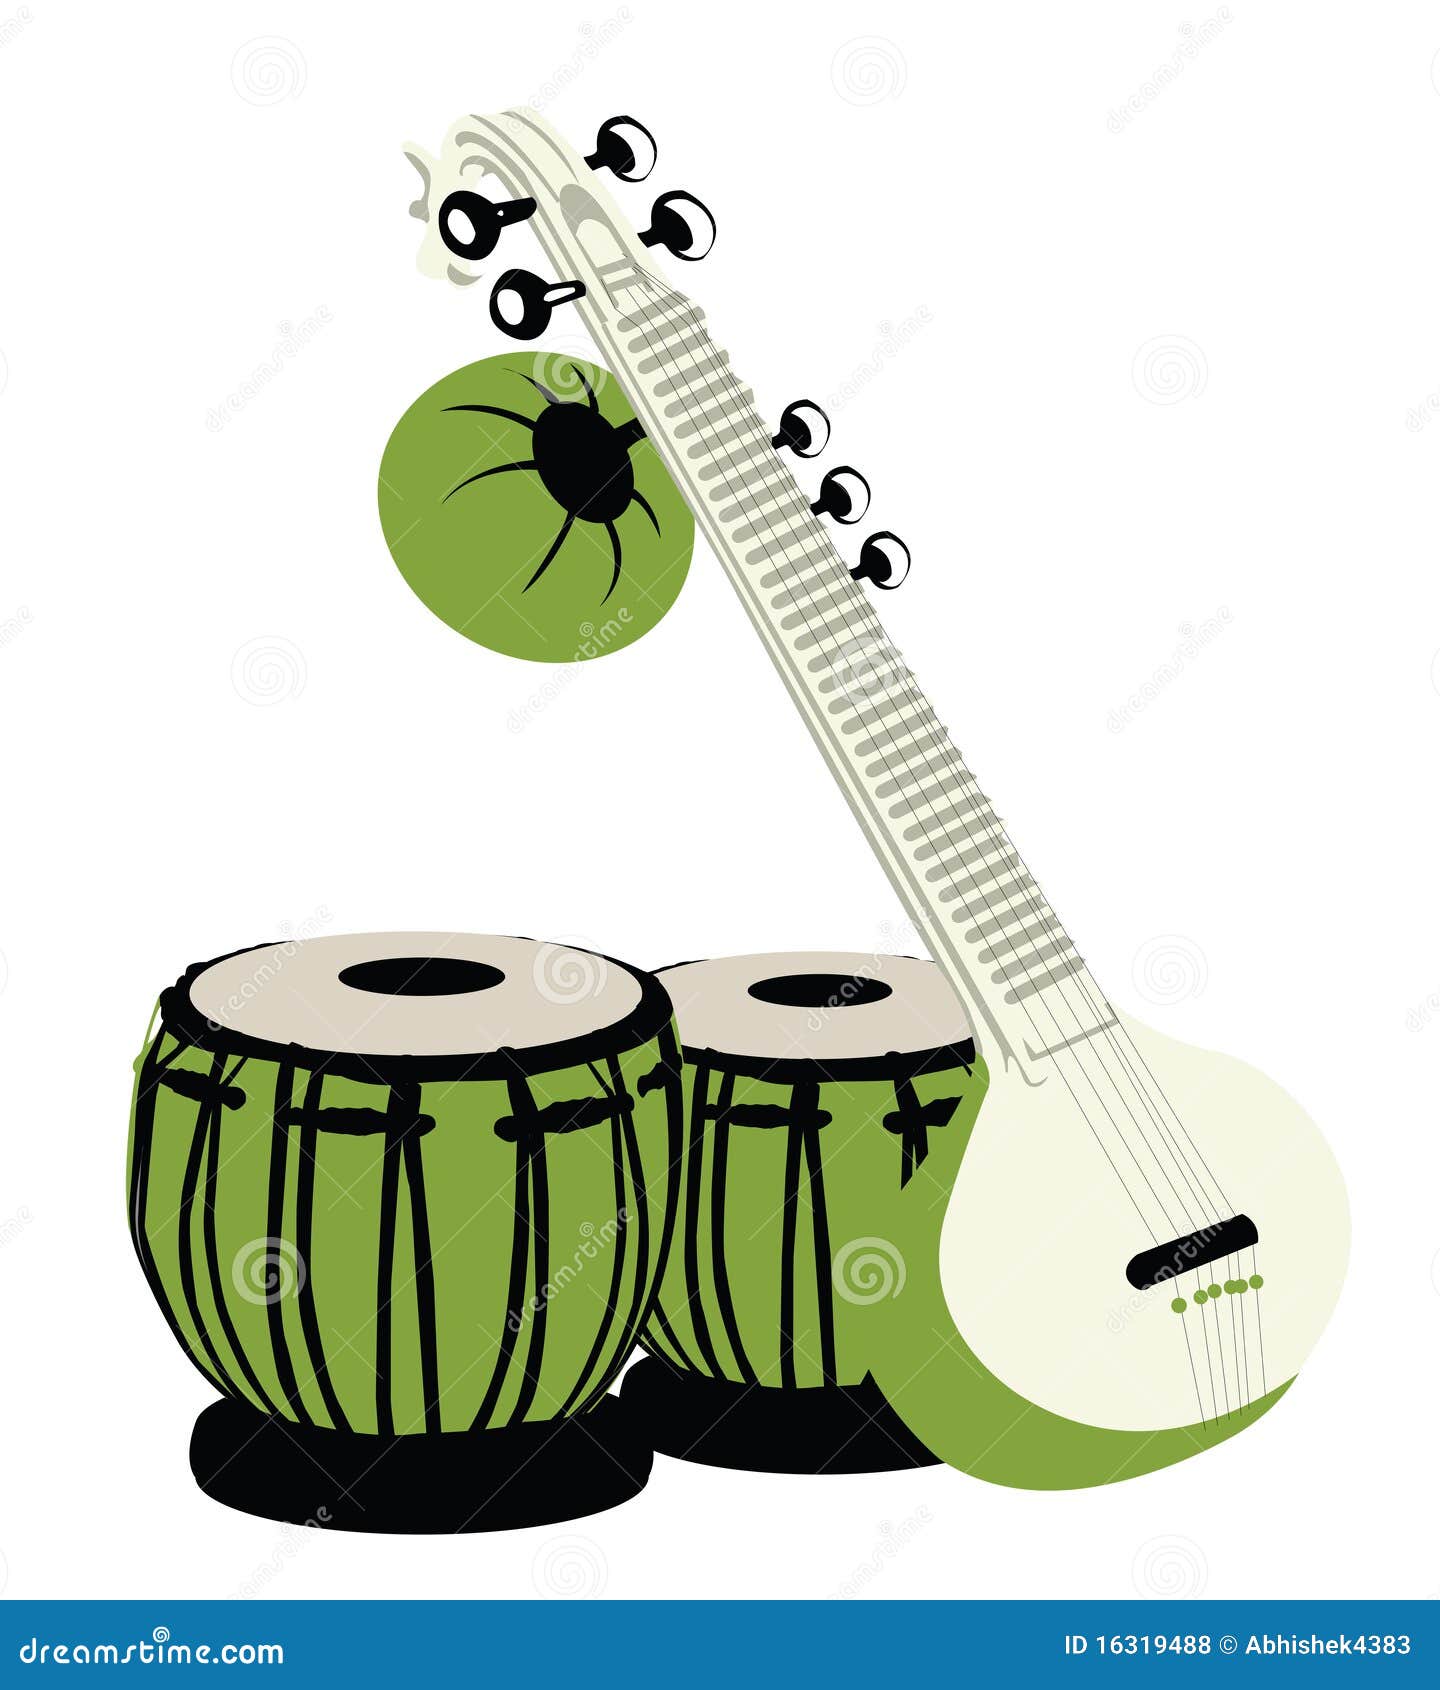 Musical instruments sketch Black and White Stock Photos & Images - Alamy